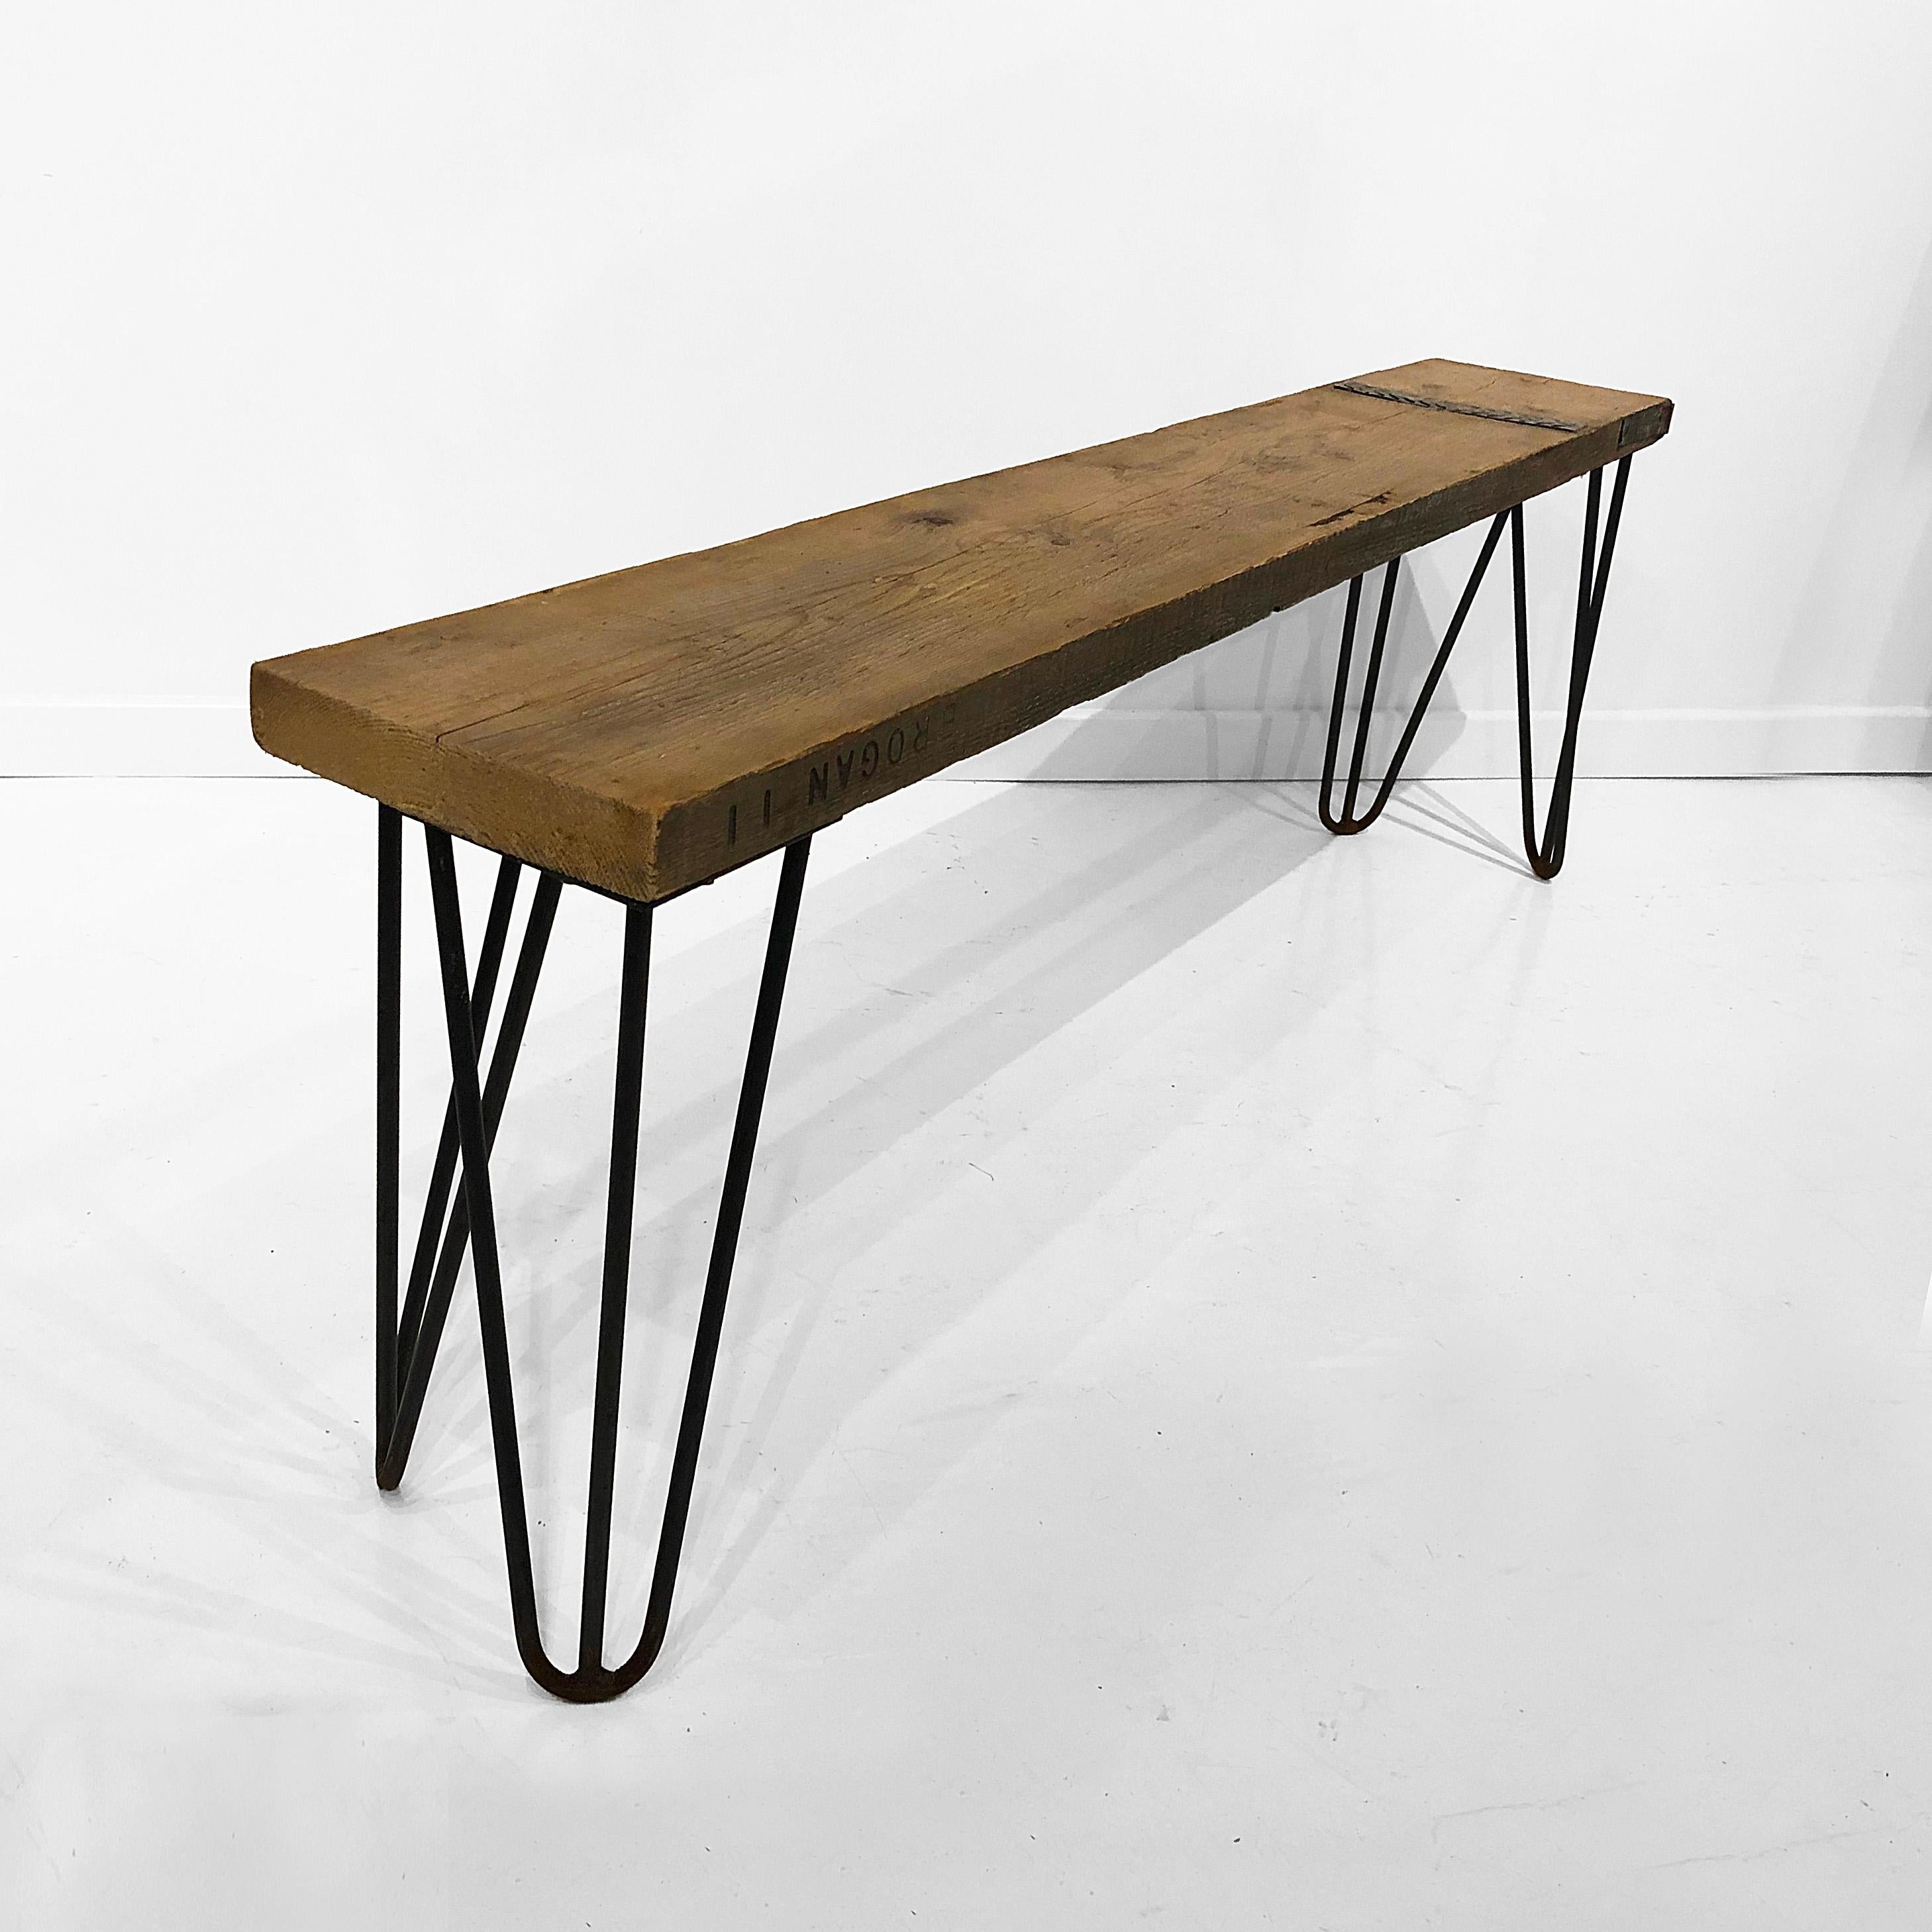 Contemporary Industrial Bench with Hairpin Legs and Scaffolding Wood Mid-Century Modern Seat For Sale